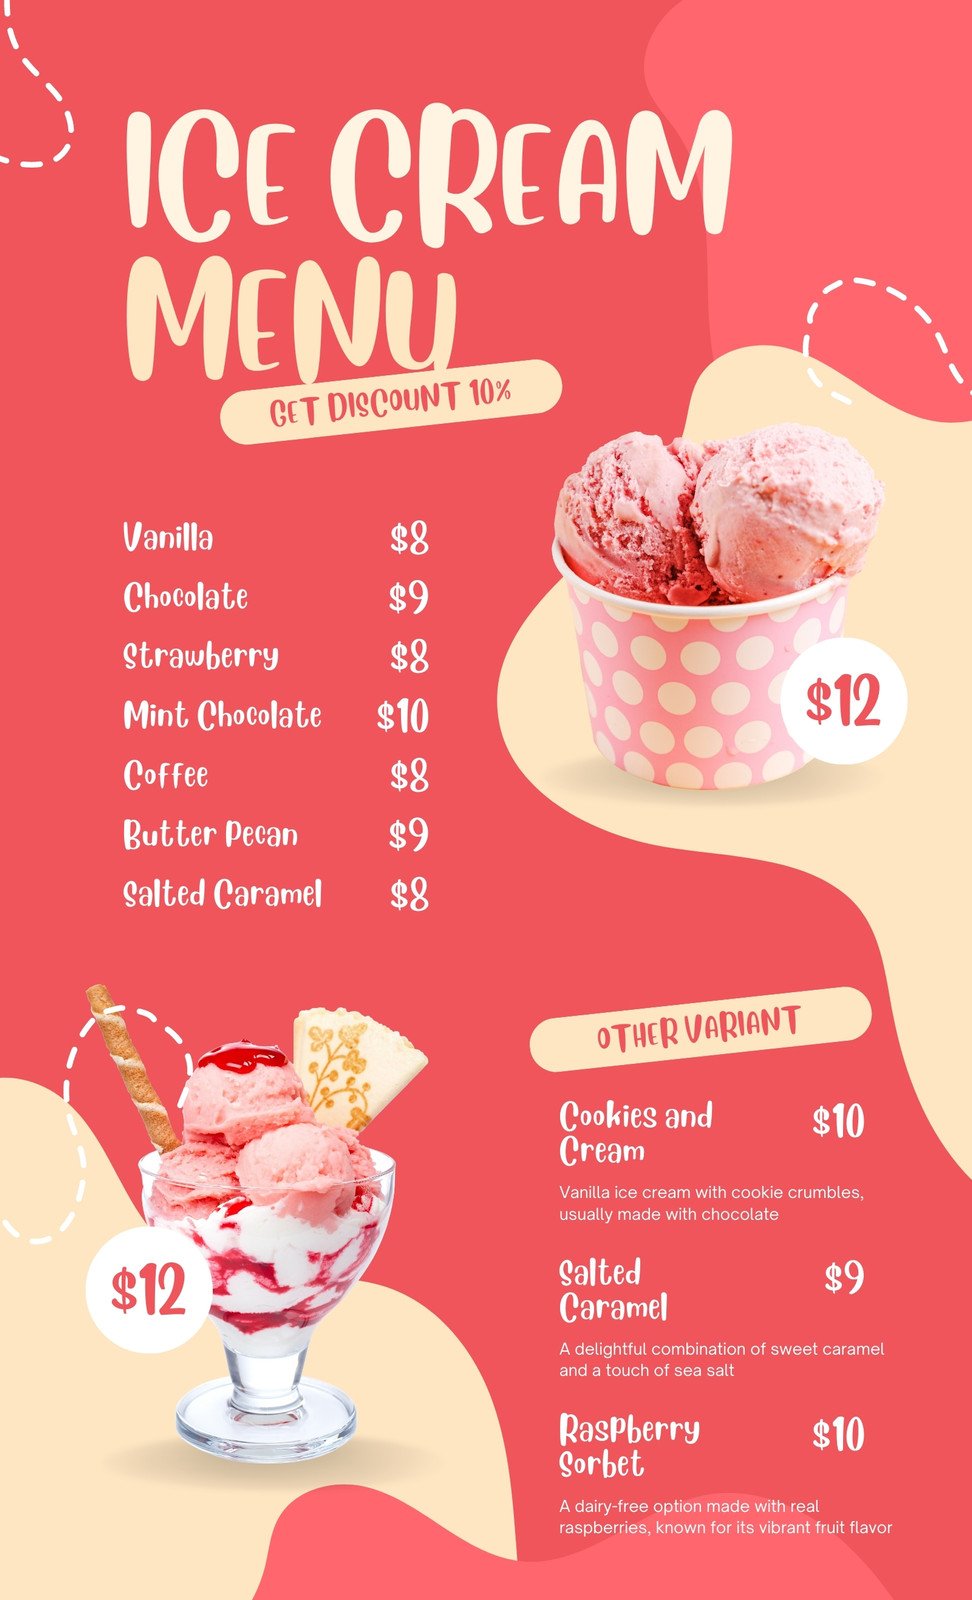 ice cream flavors list with pictures - Google Search  Ice cream menu, Ice  cream flavors list, Ice cream flavors